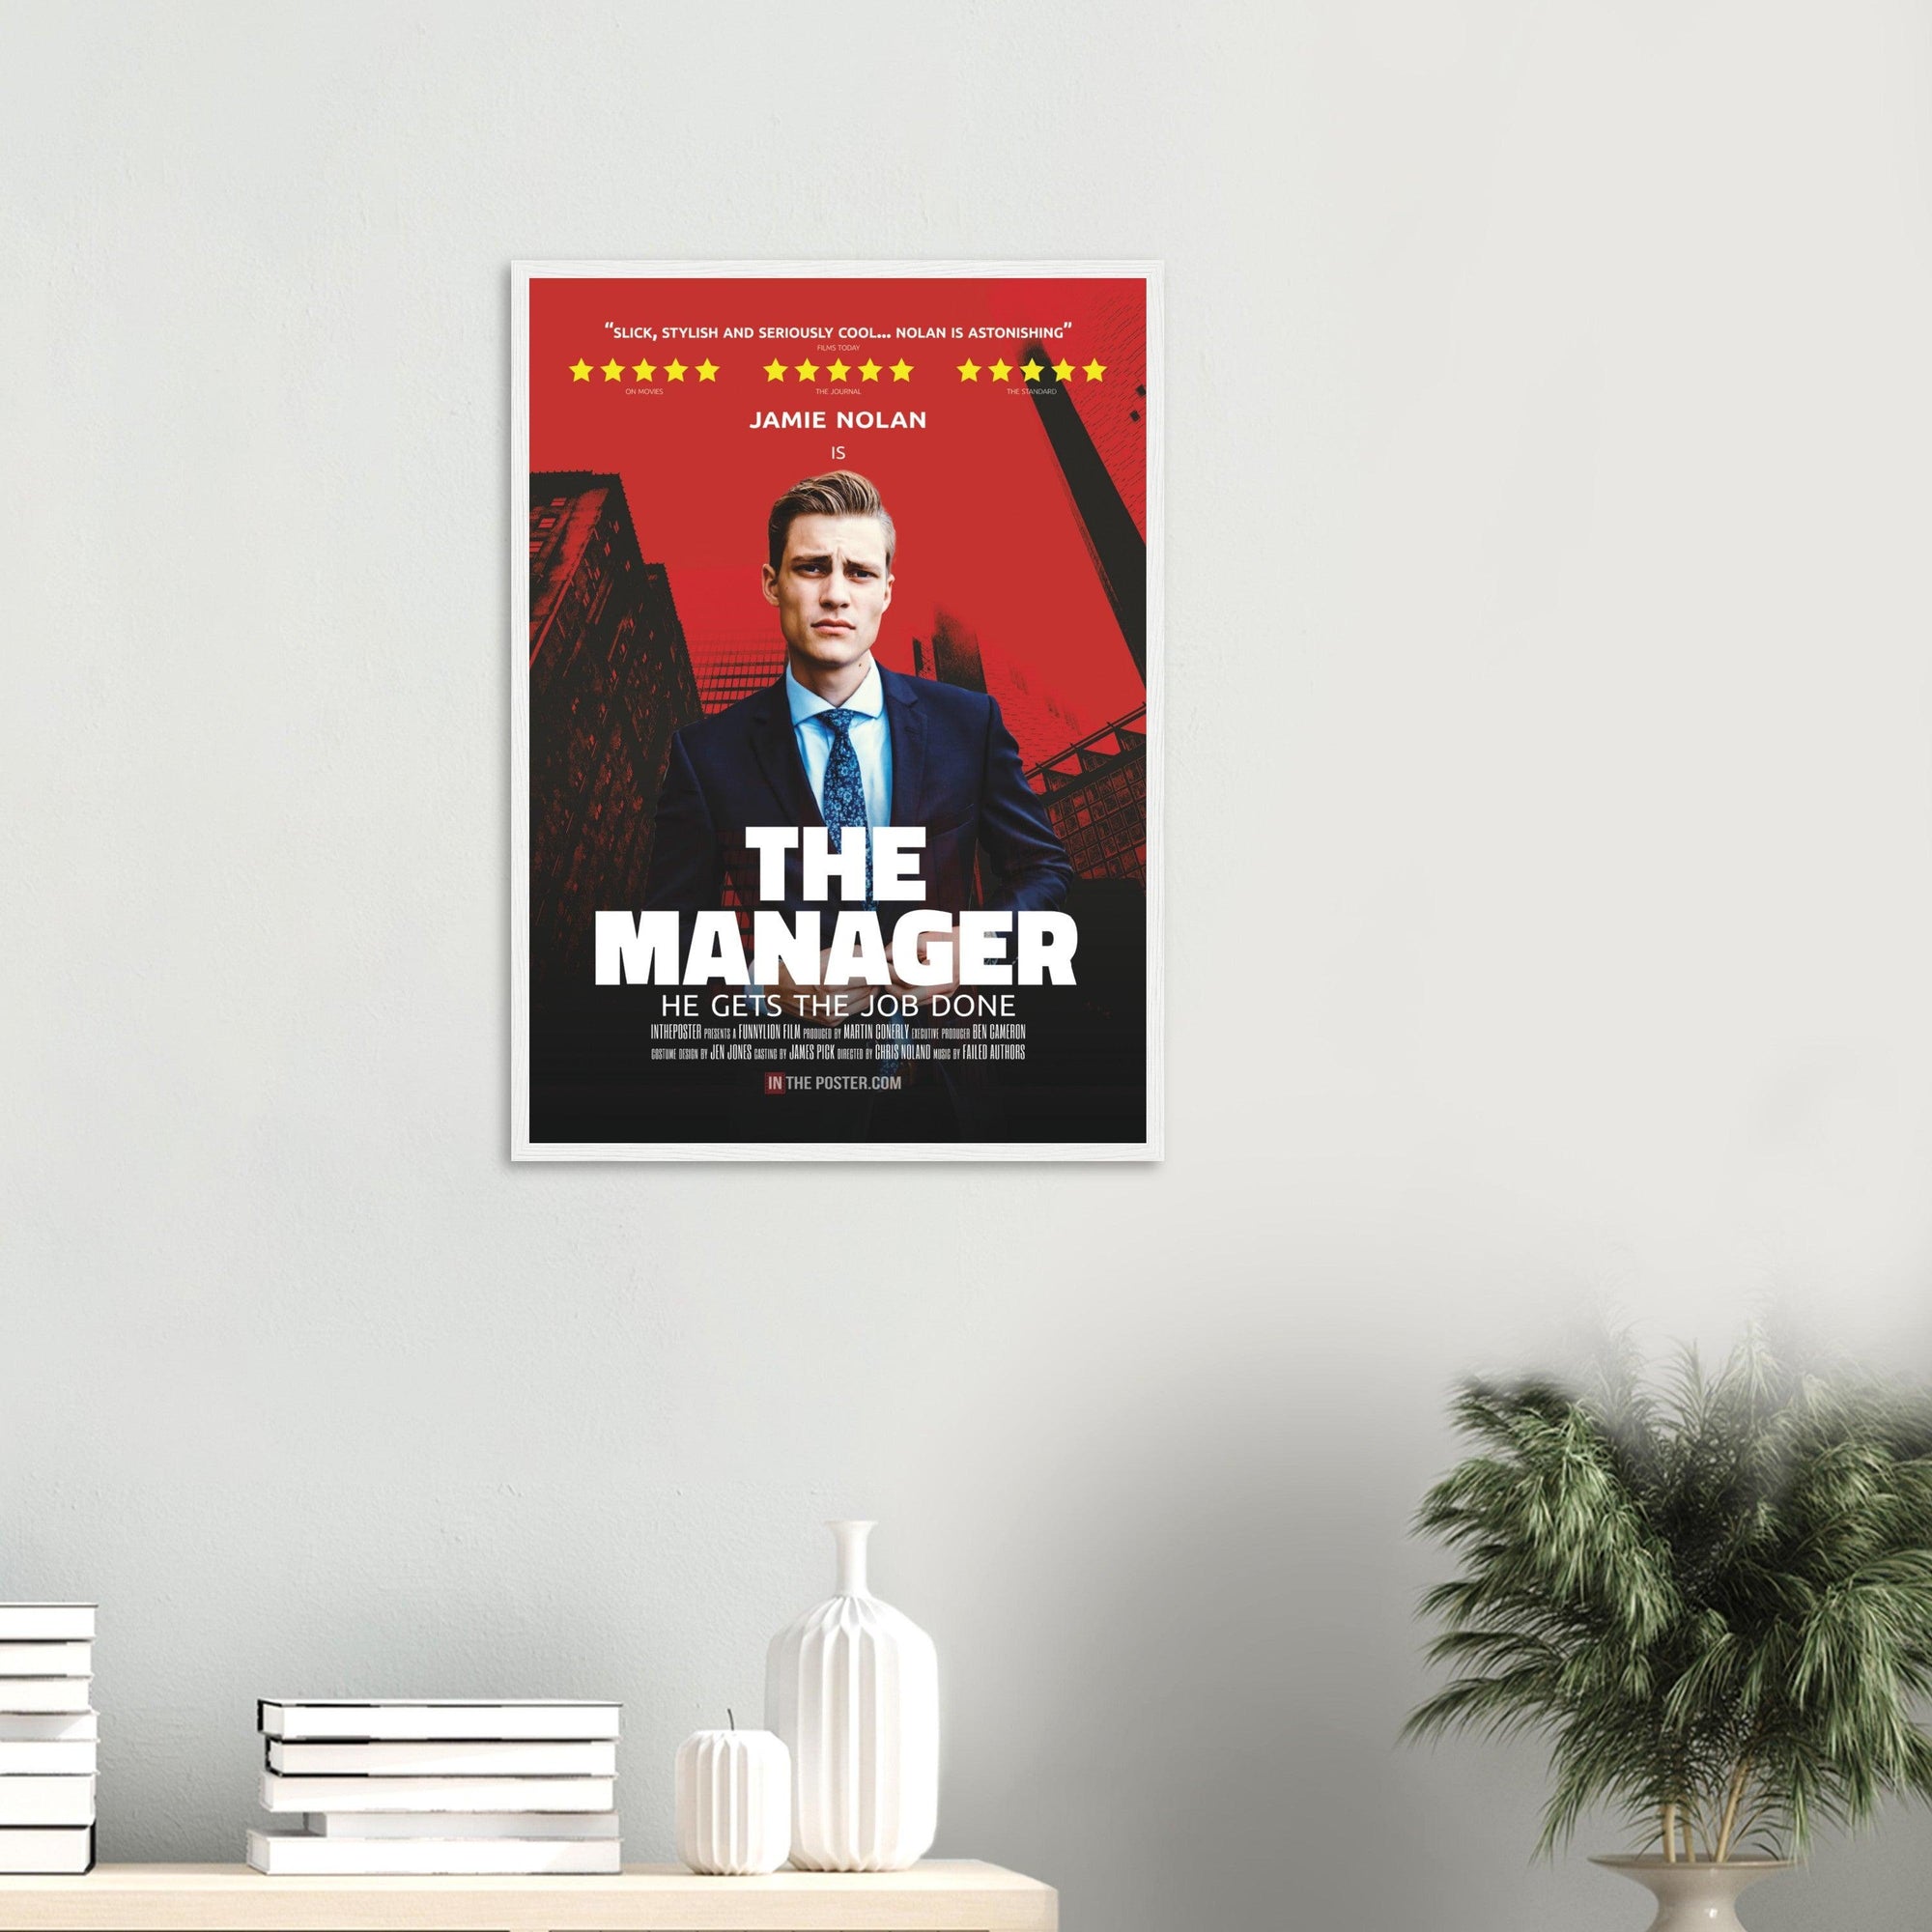 Regular framed The Manager movie poster with a white frame above a desk and a plant